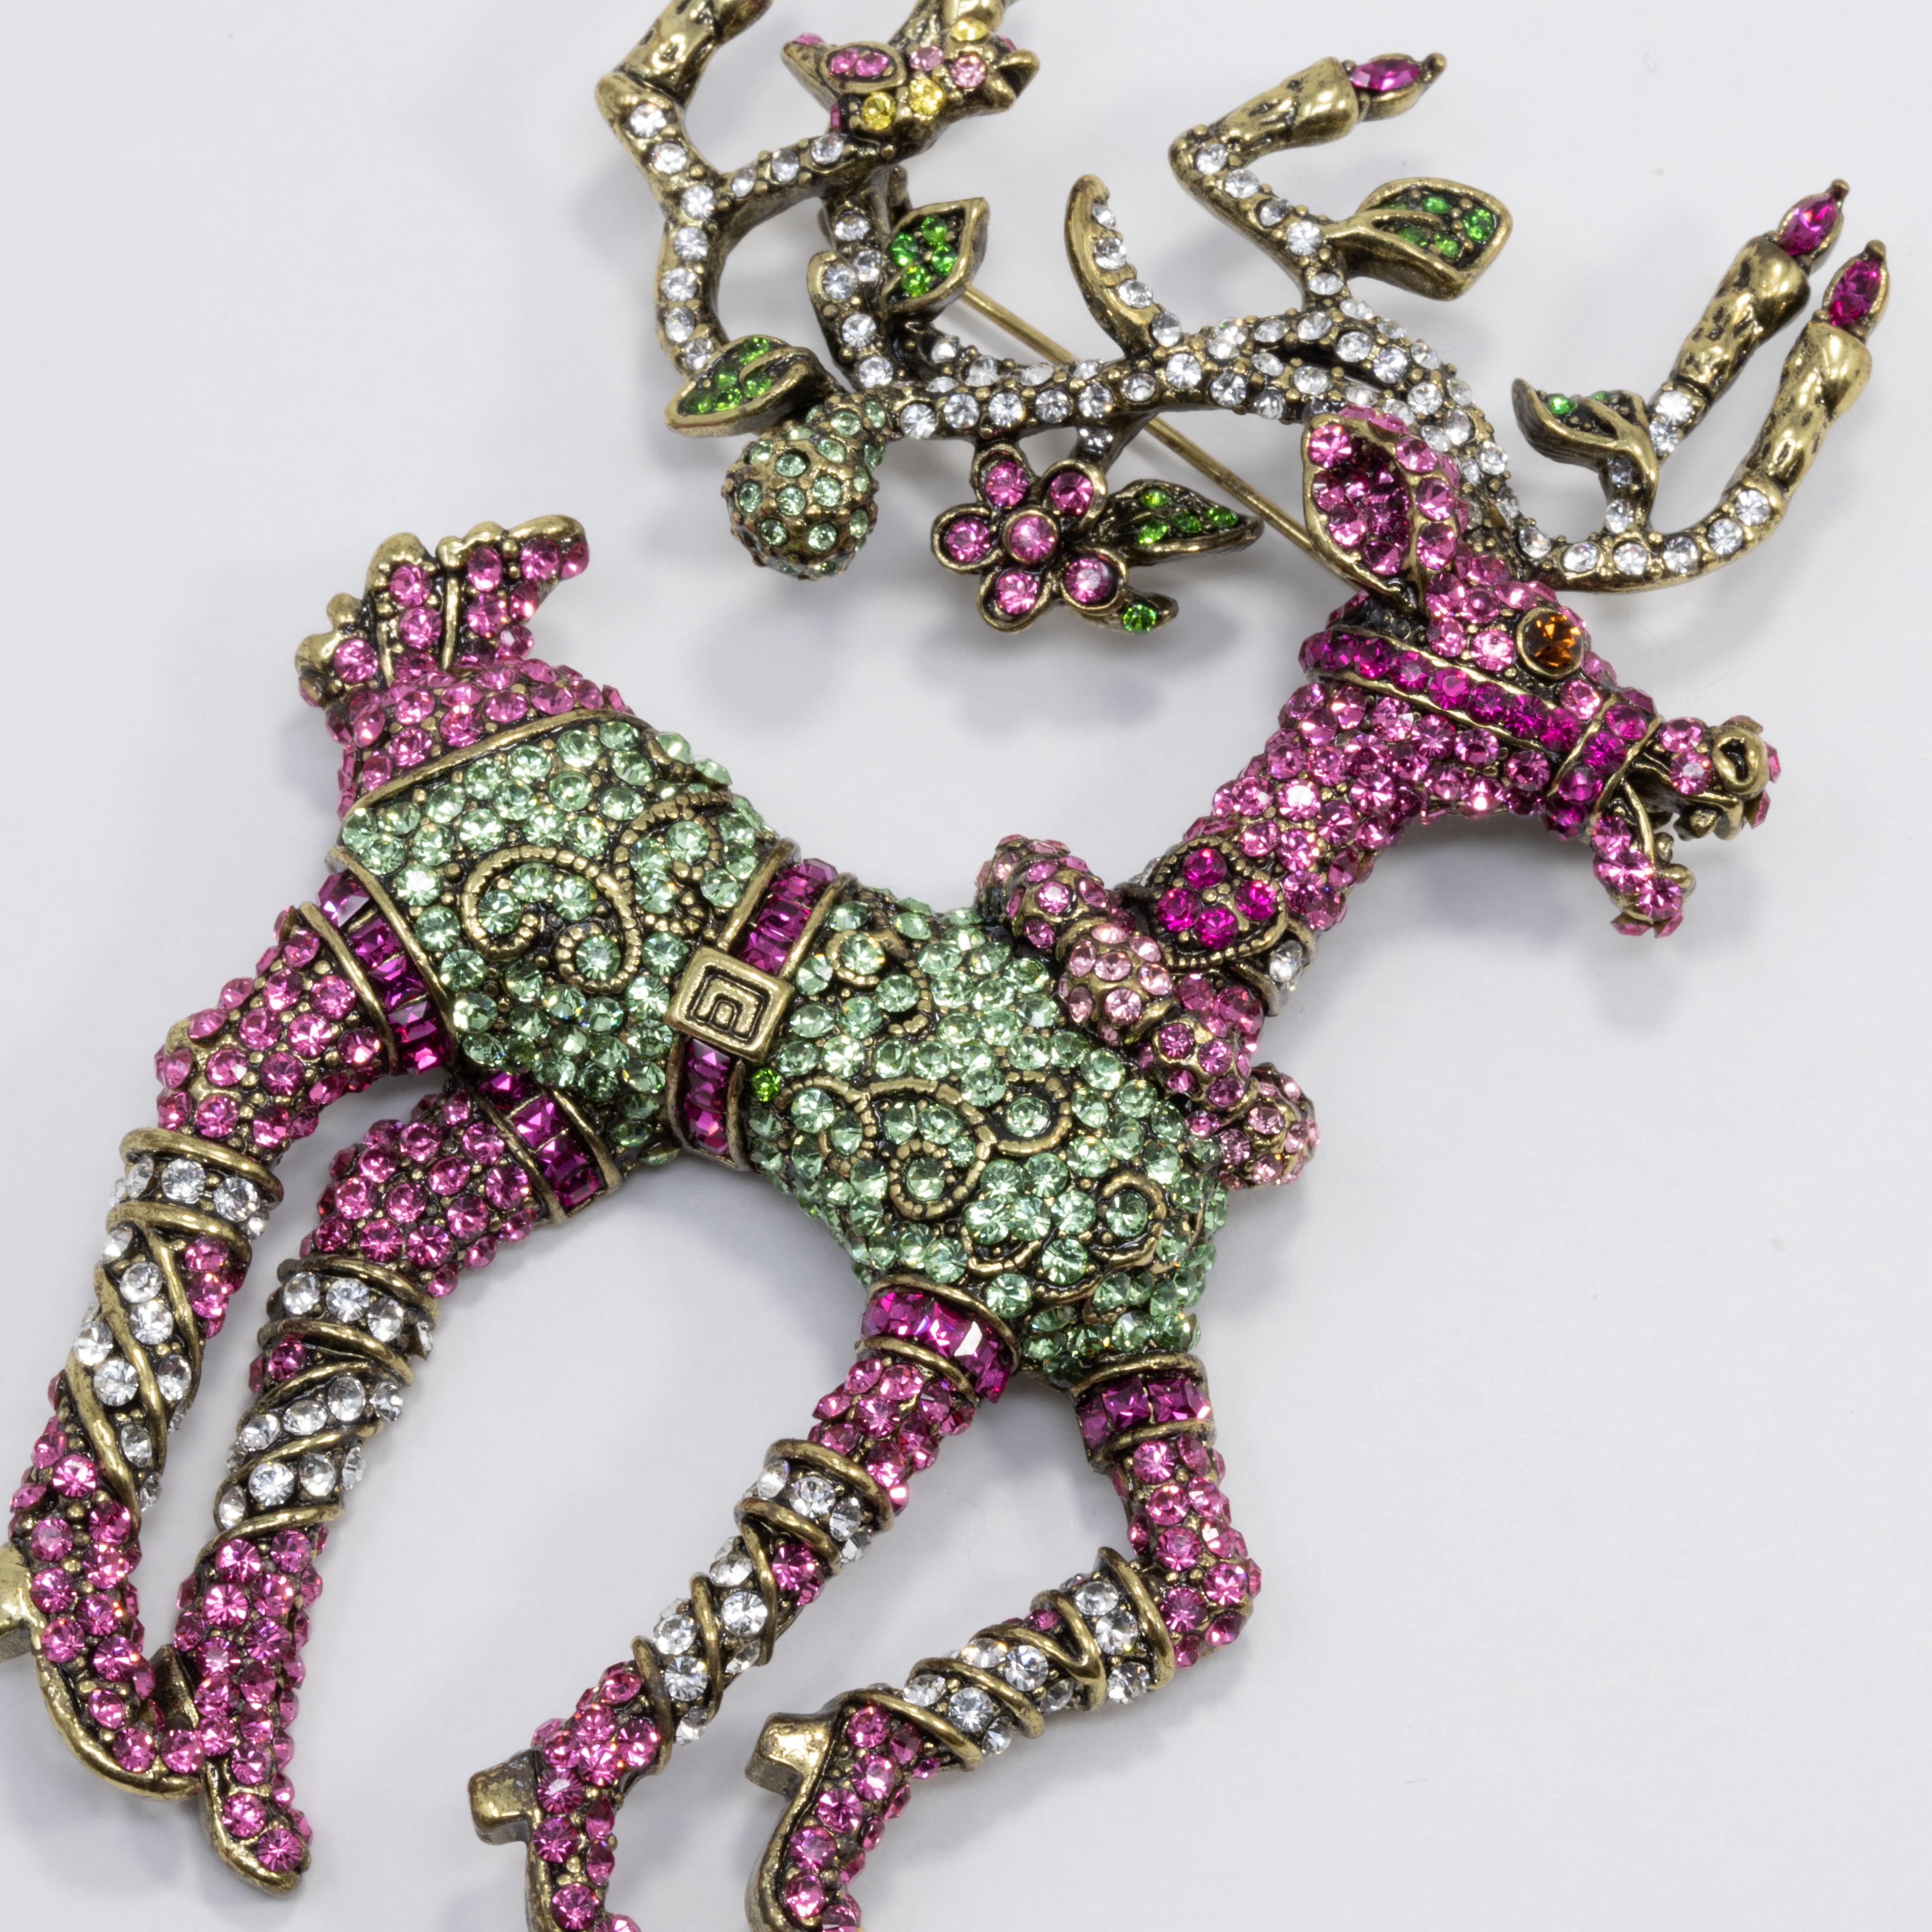 A whimsical pin by Heidi Daus. This lovely brooch features a reindeer, decorated with colorful pave crystals in purple, pink, and green. Set on matching brass tone metal.

Hallmarks: Heidi Daus